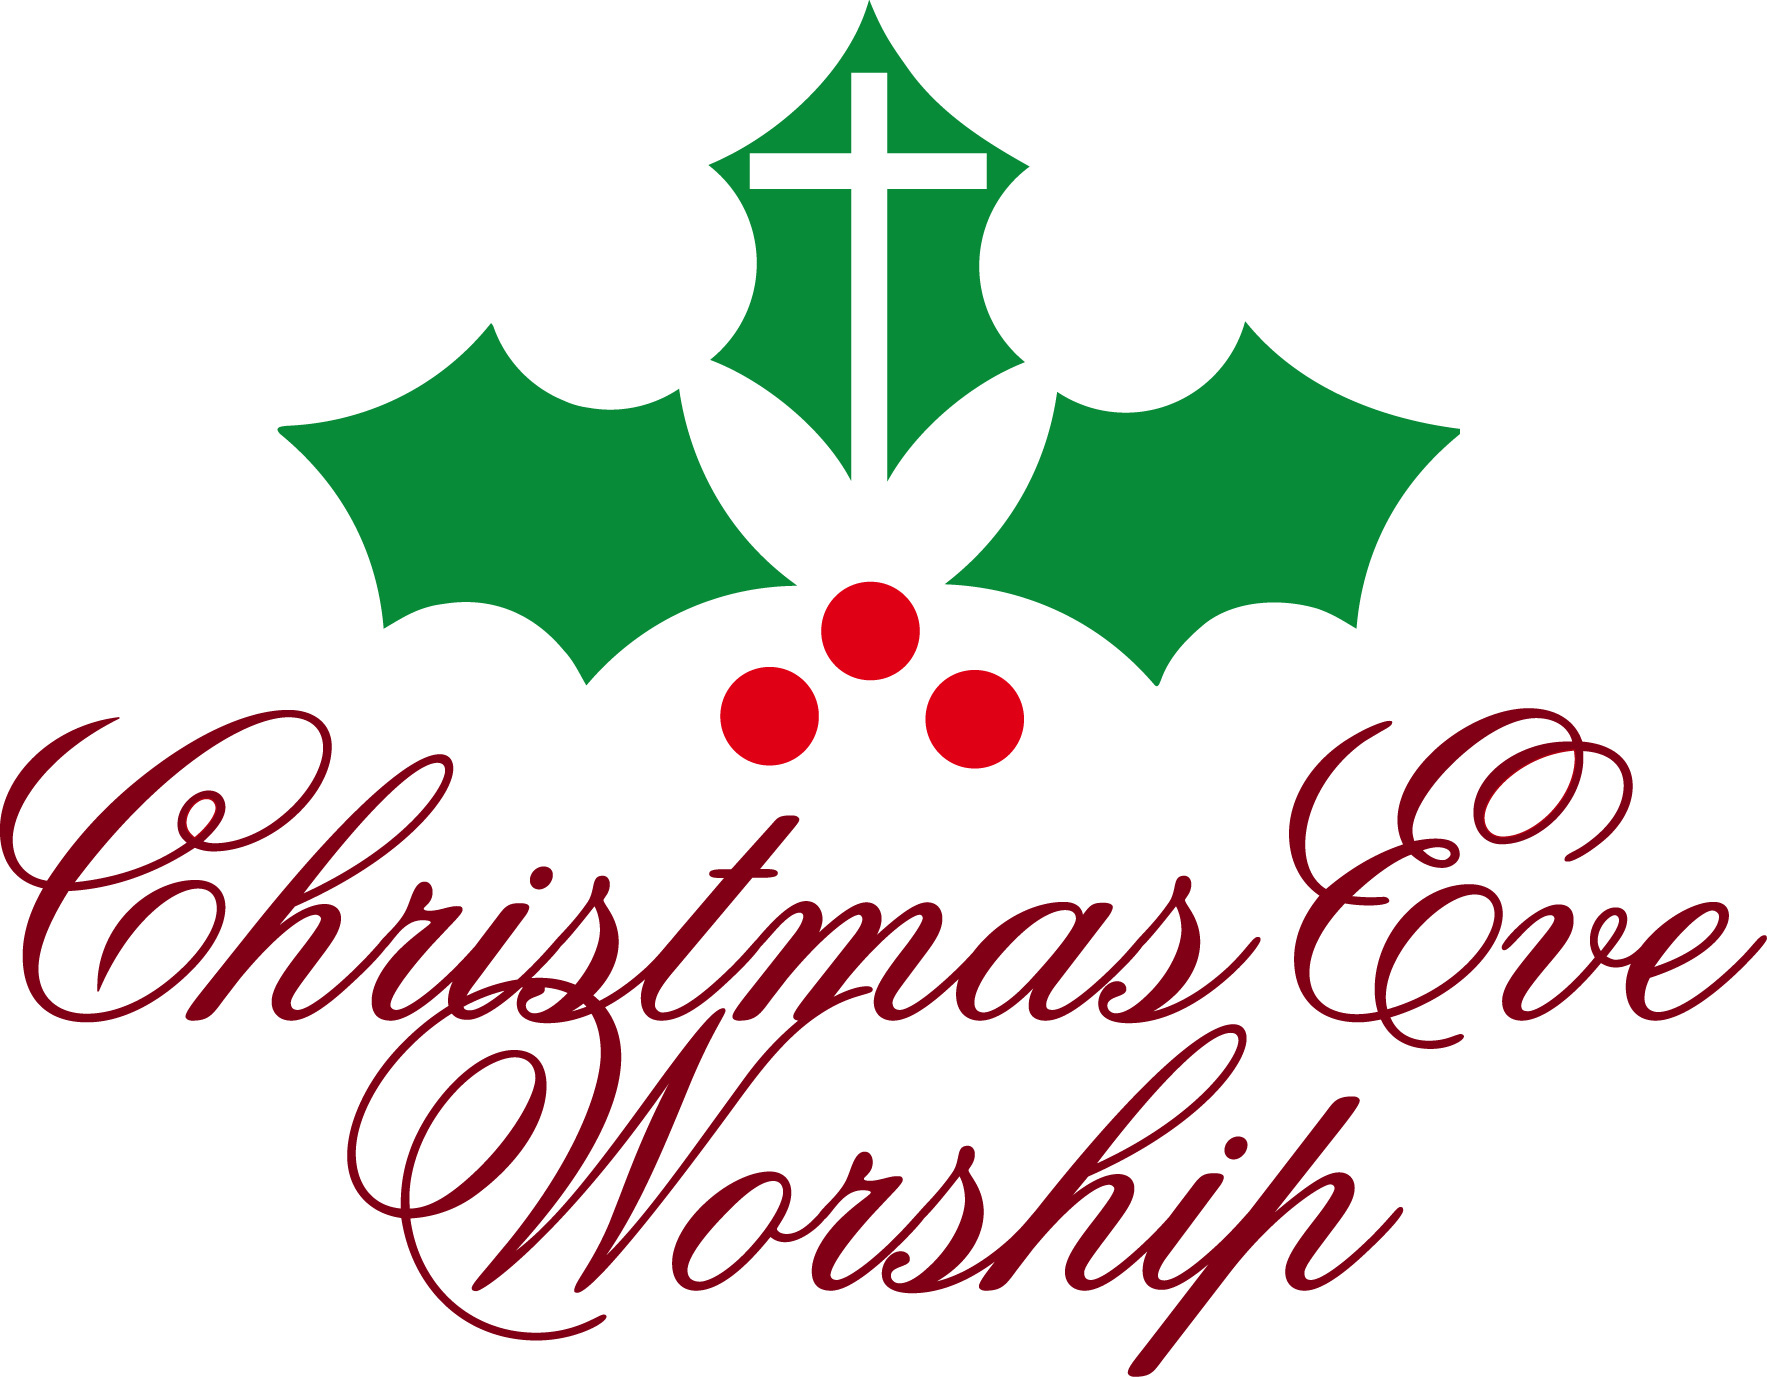 Worship Clipart Christmas Eve Services free image